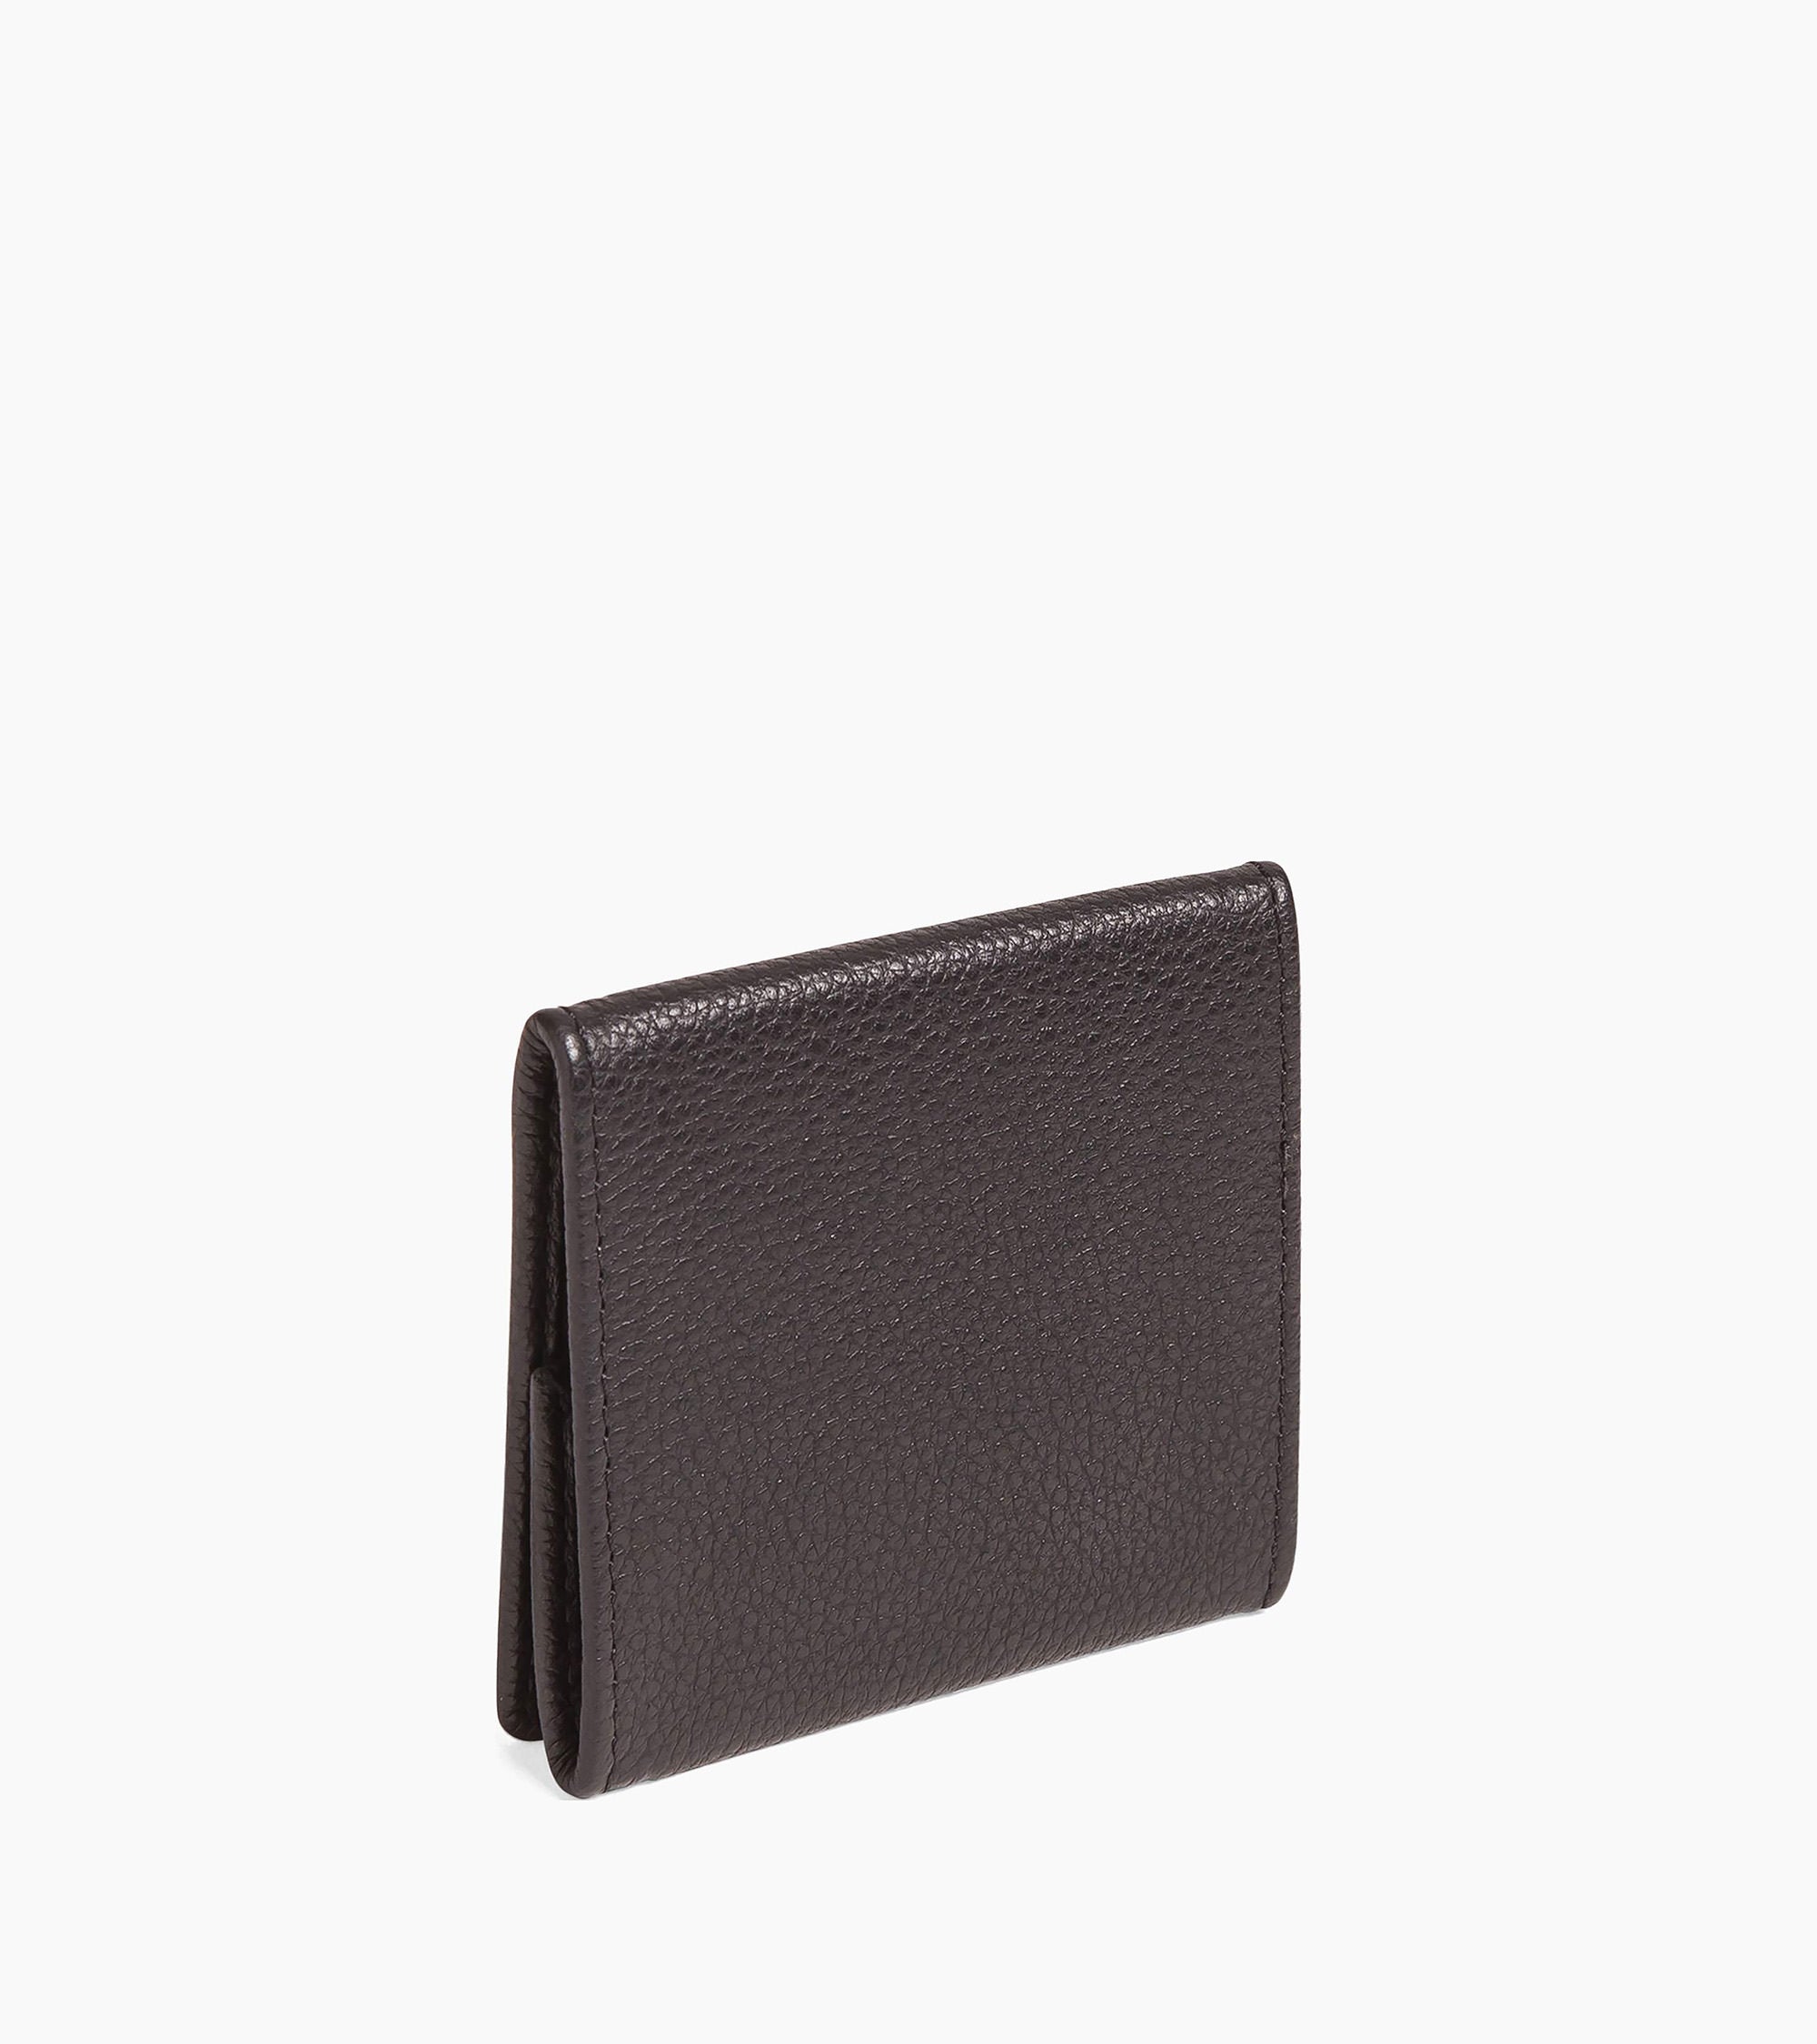 Charles pebbled leather coin wallet